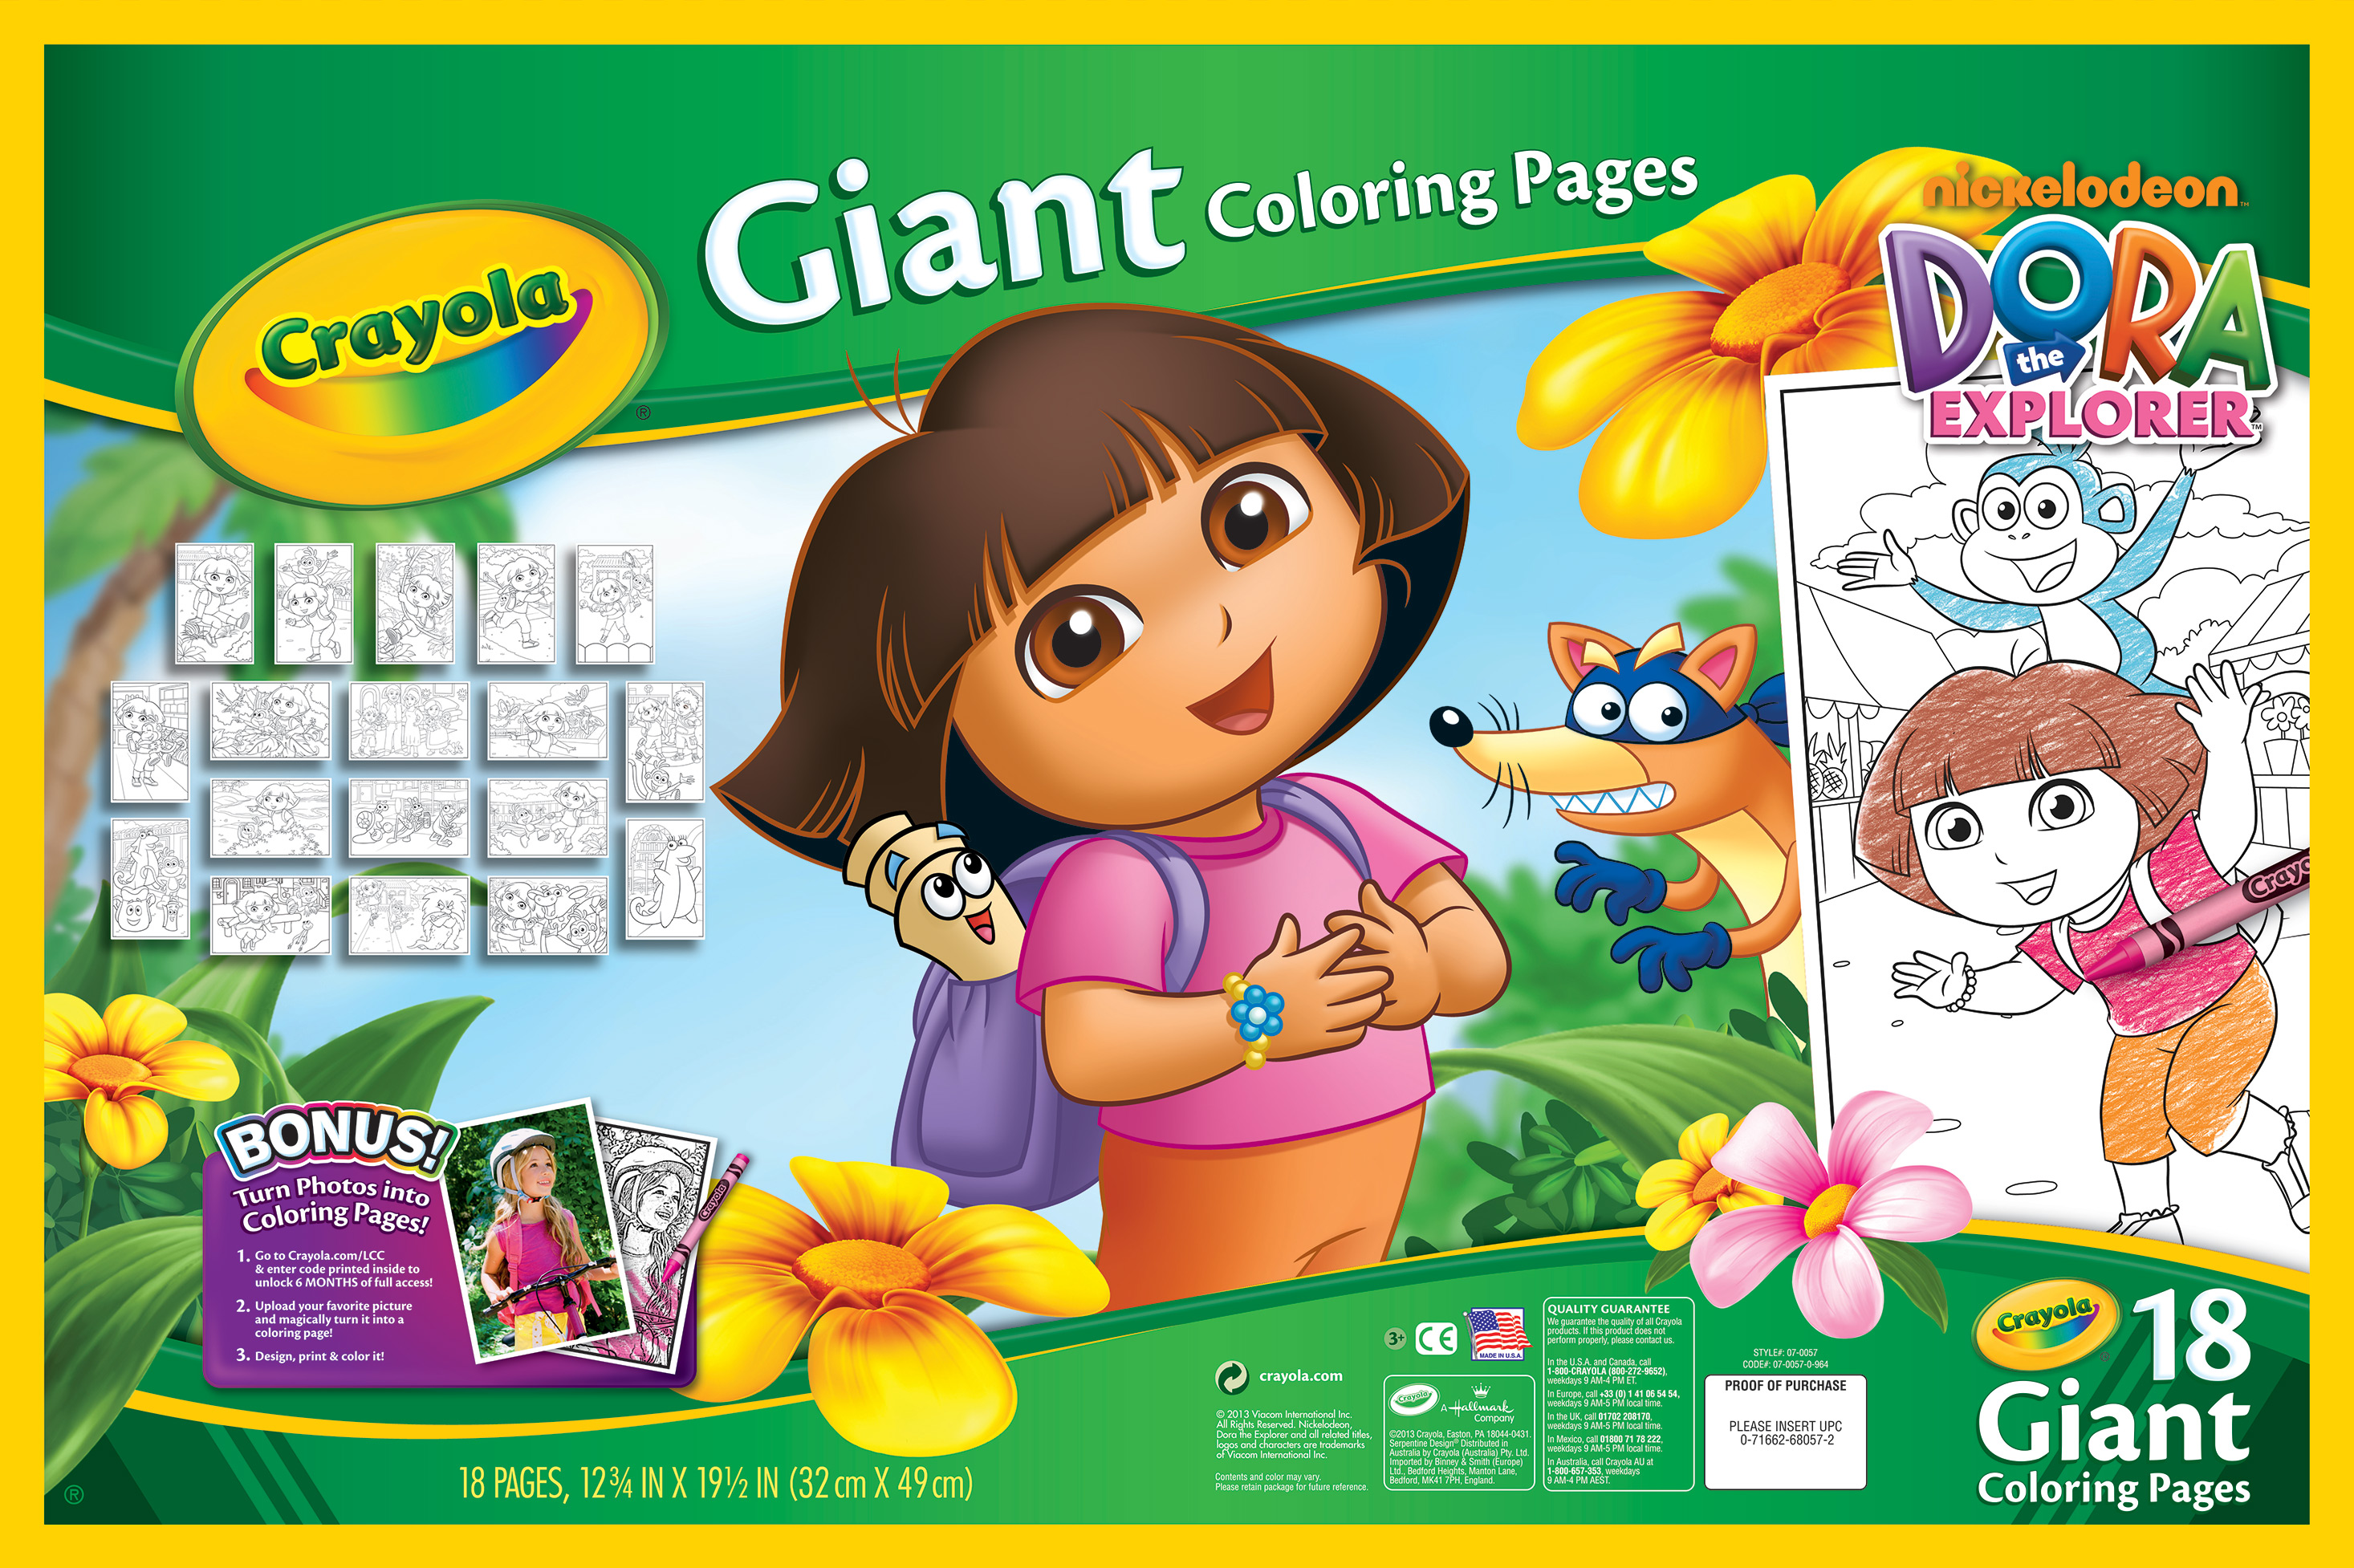 Giant Coloring Pages, Dora the Explorer | Crayola